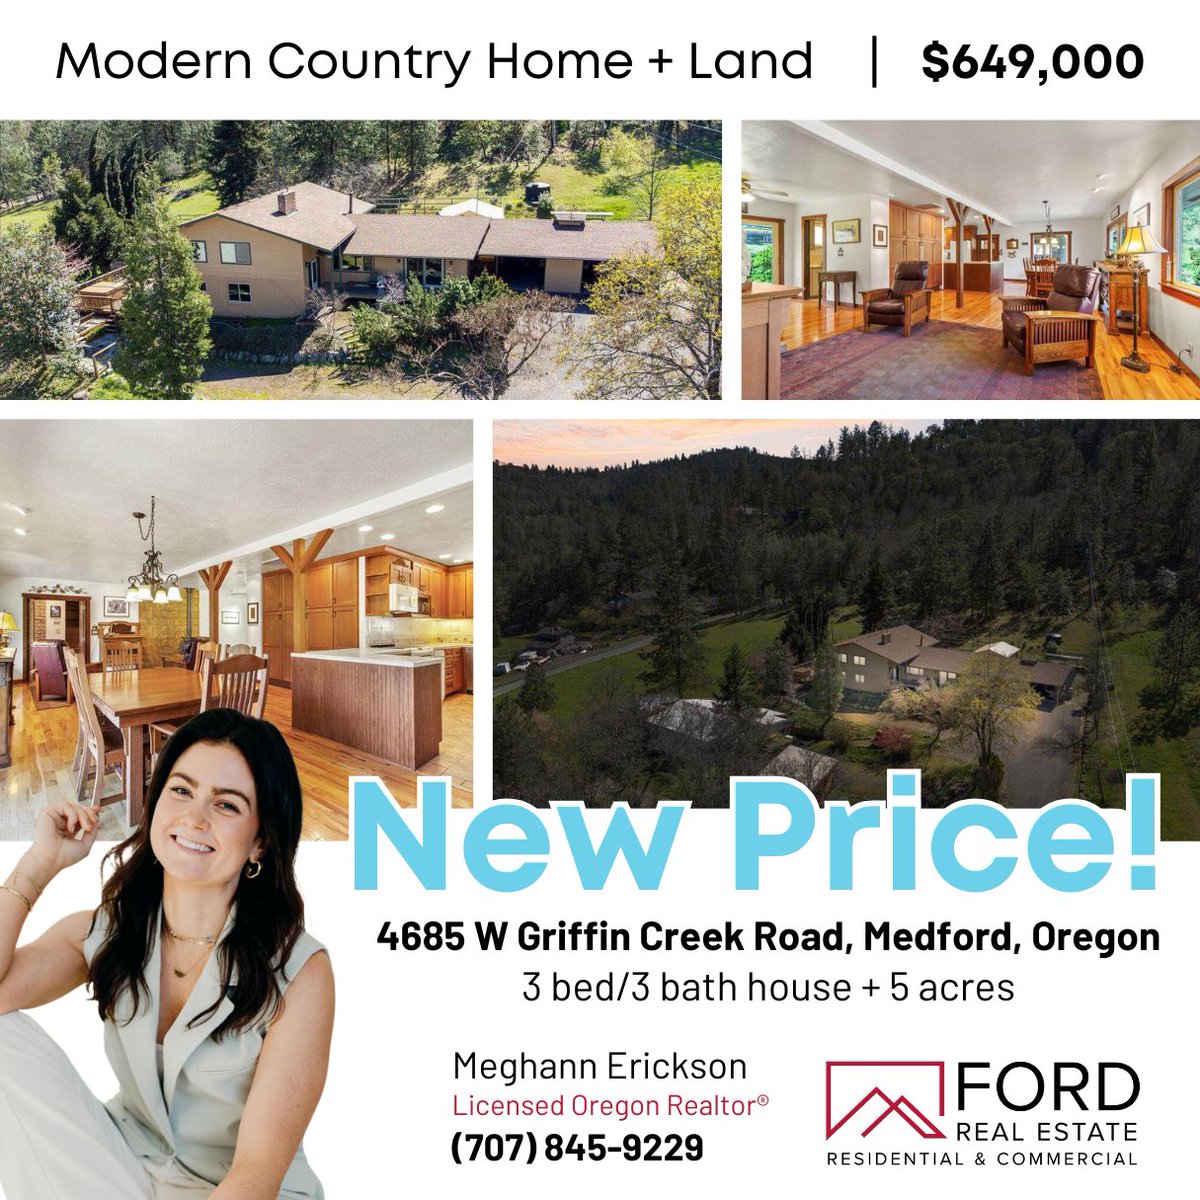 Price improvement for 4685 W Griffin Creek Road in Medford! See Meghann's full listing here: zurl.co/SVQx #PriceDrop #RealEstate